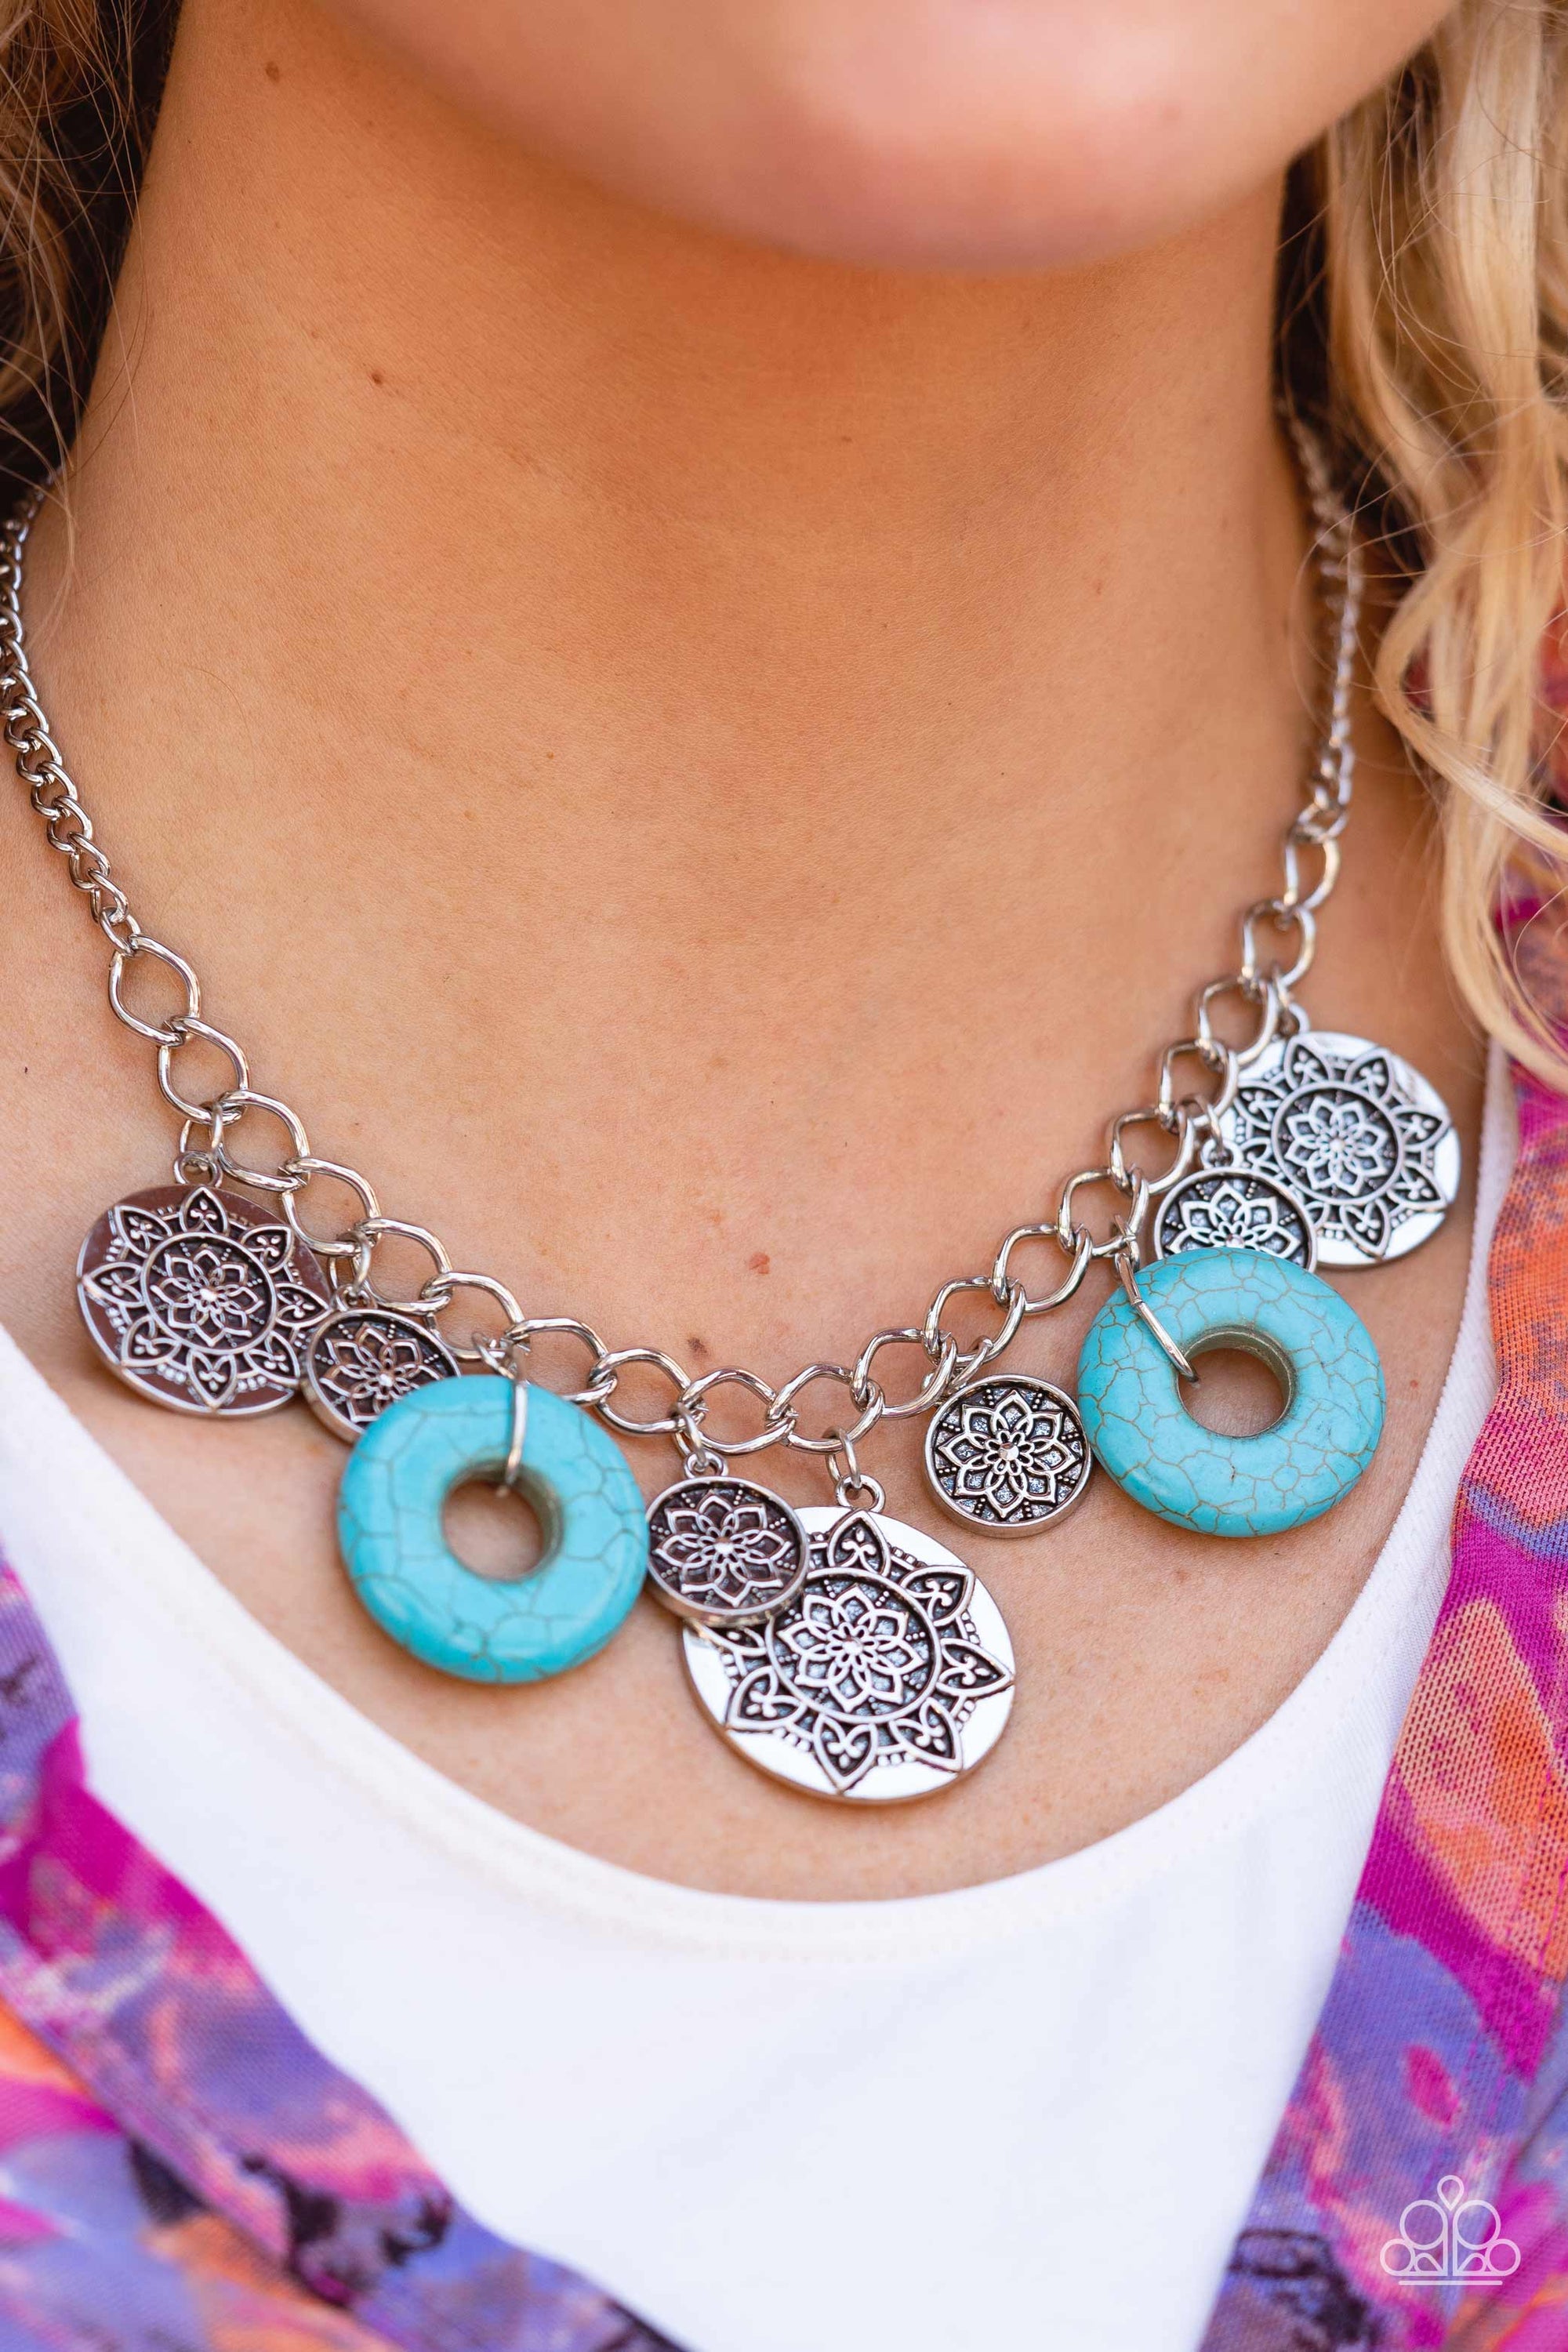 Western Zen Turquoise Blue Stone Necklace - Paparazzi Accessories- lightbox - CarasShop.com - $5 Jewelry by Cara Jewels